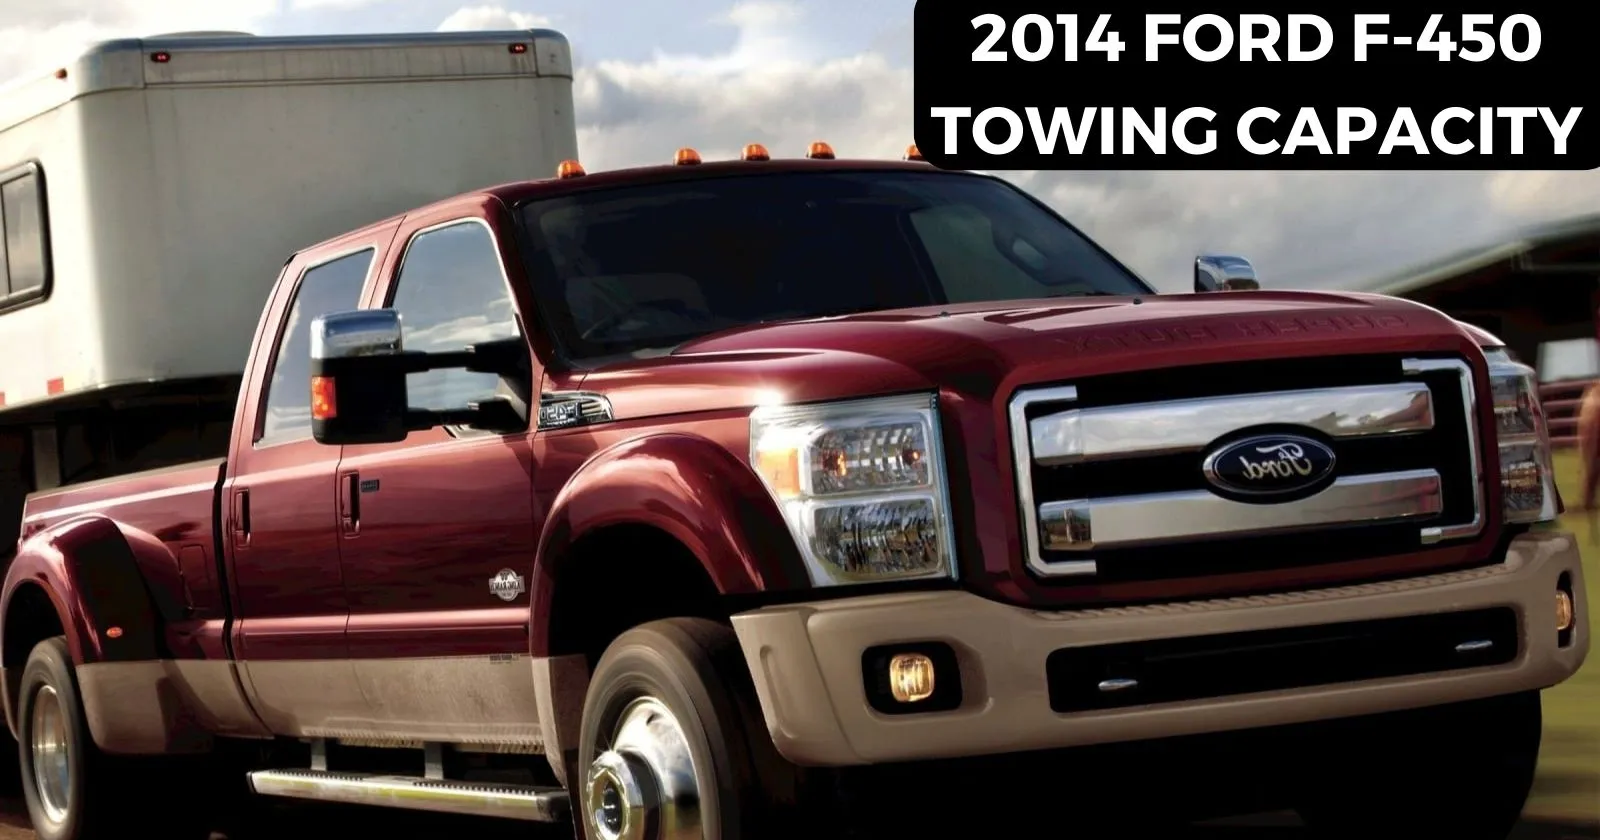 explore-2014-ford-f-450-towing-capacity-with-chart-thecartowing